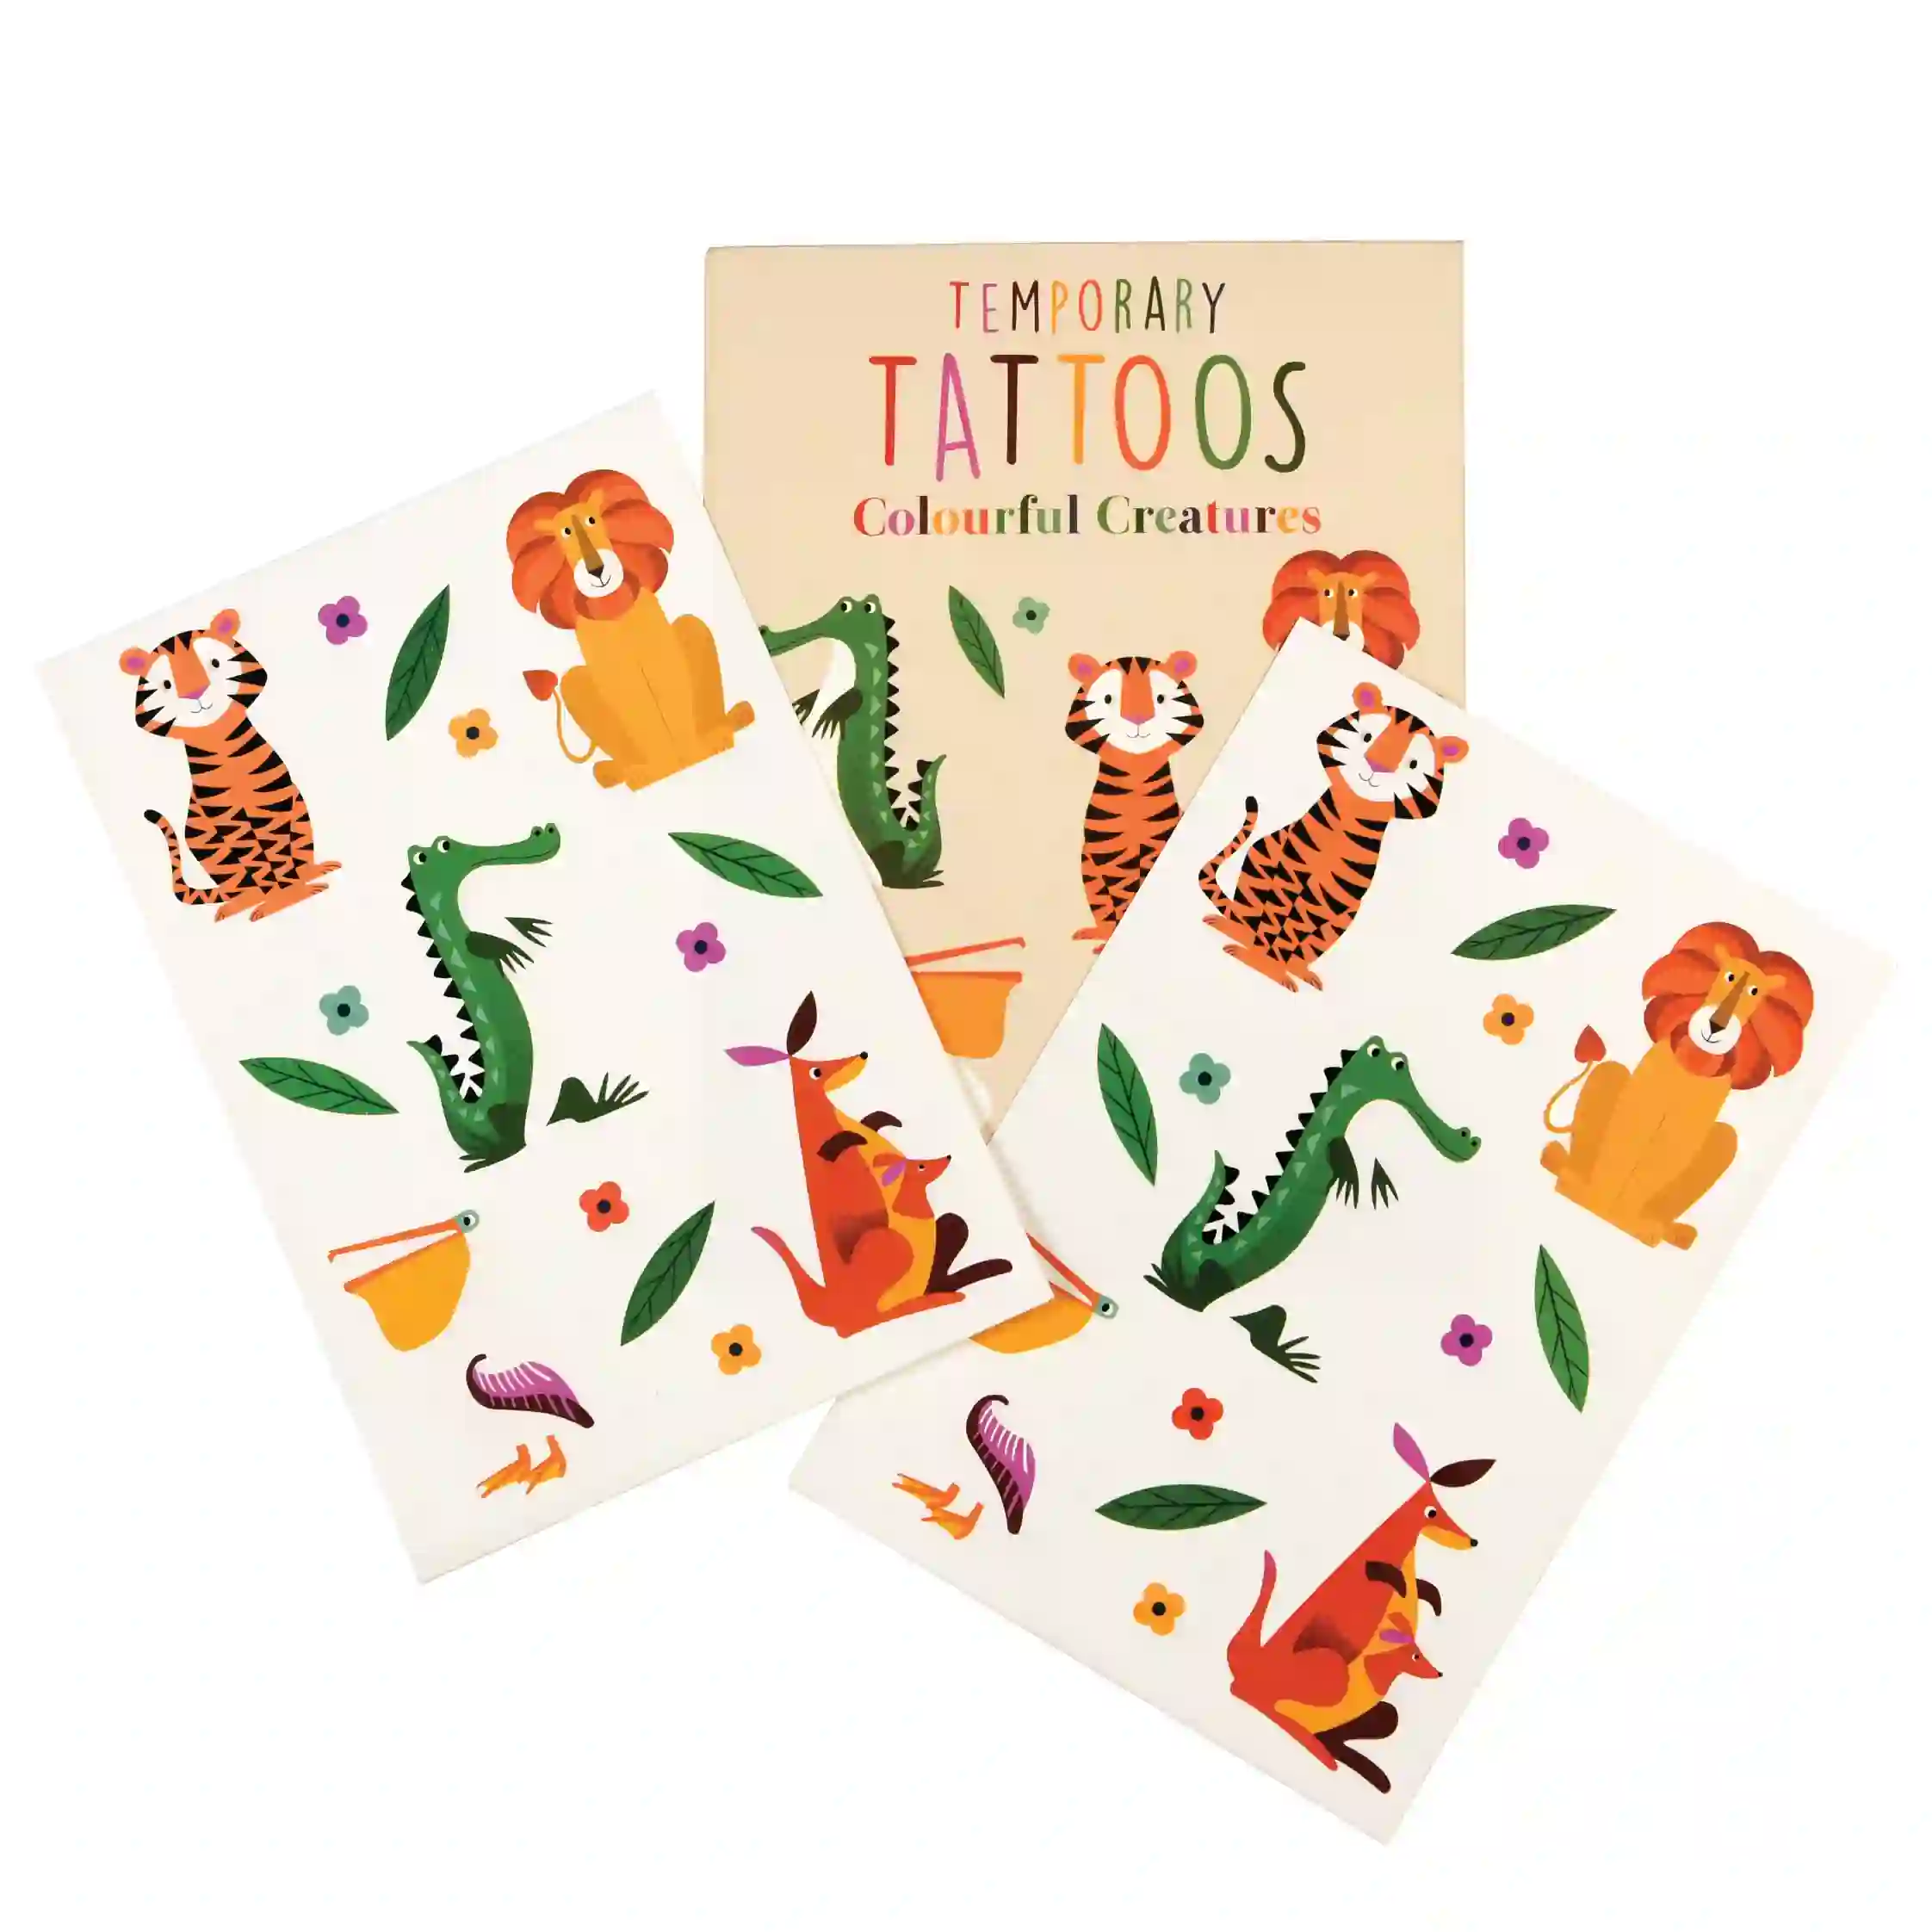 temporary tattoos - colourful creatures